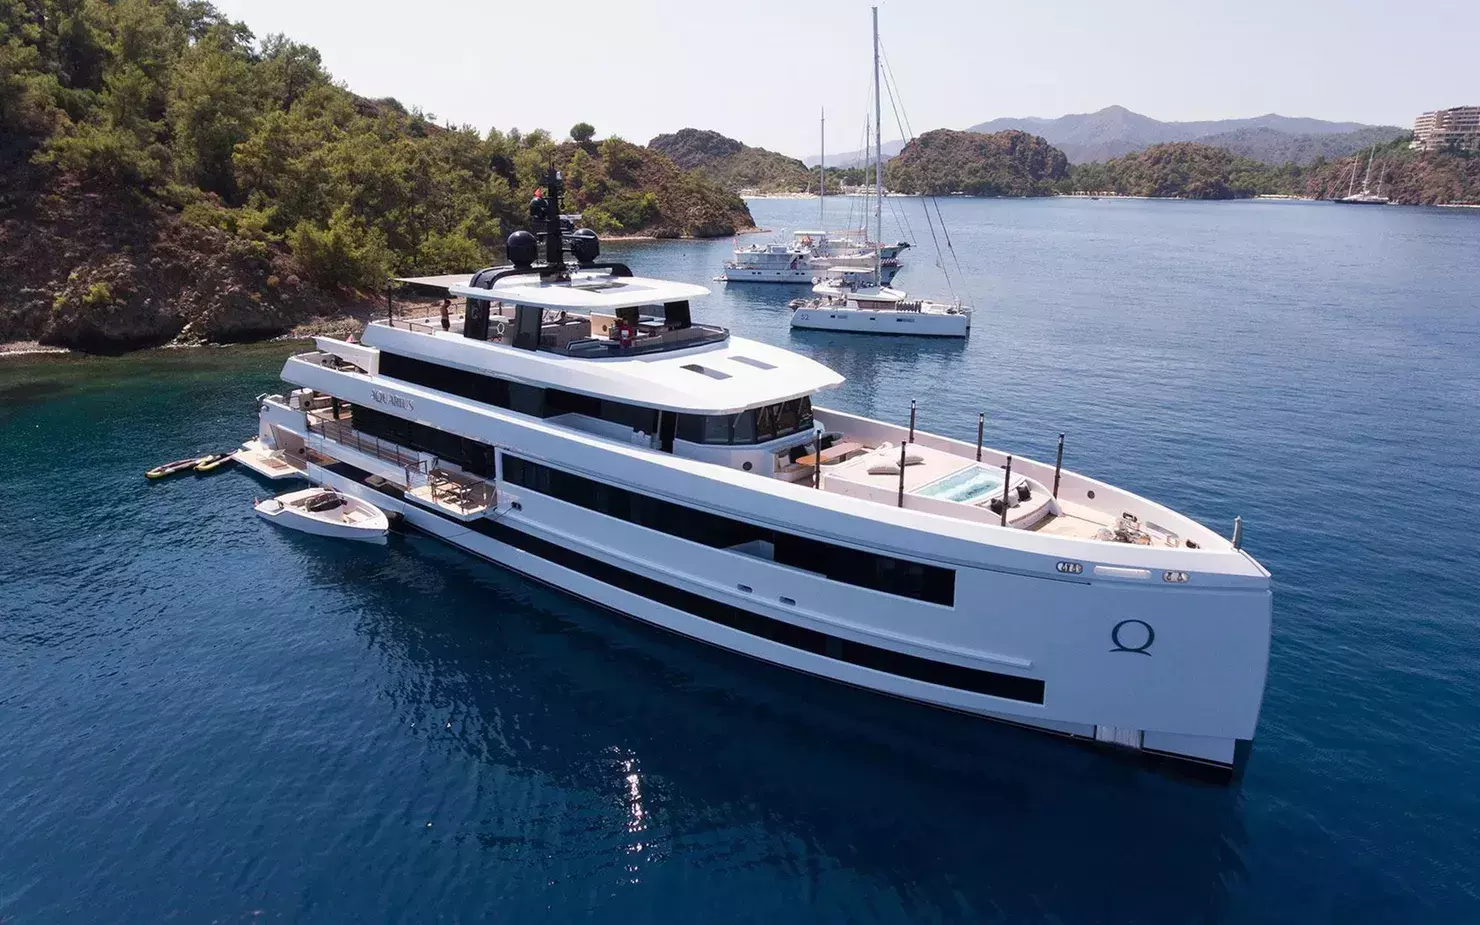 Aquarius by Mengi Yay - Top rates for a Charter of a private Superyacht in Turkey